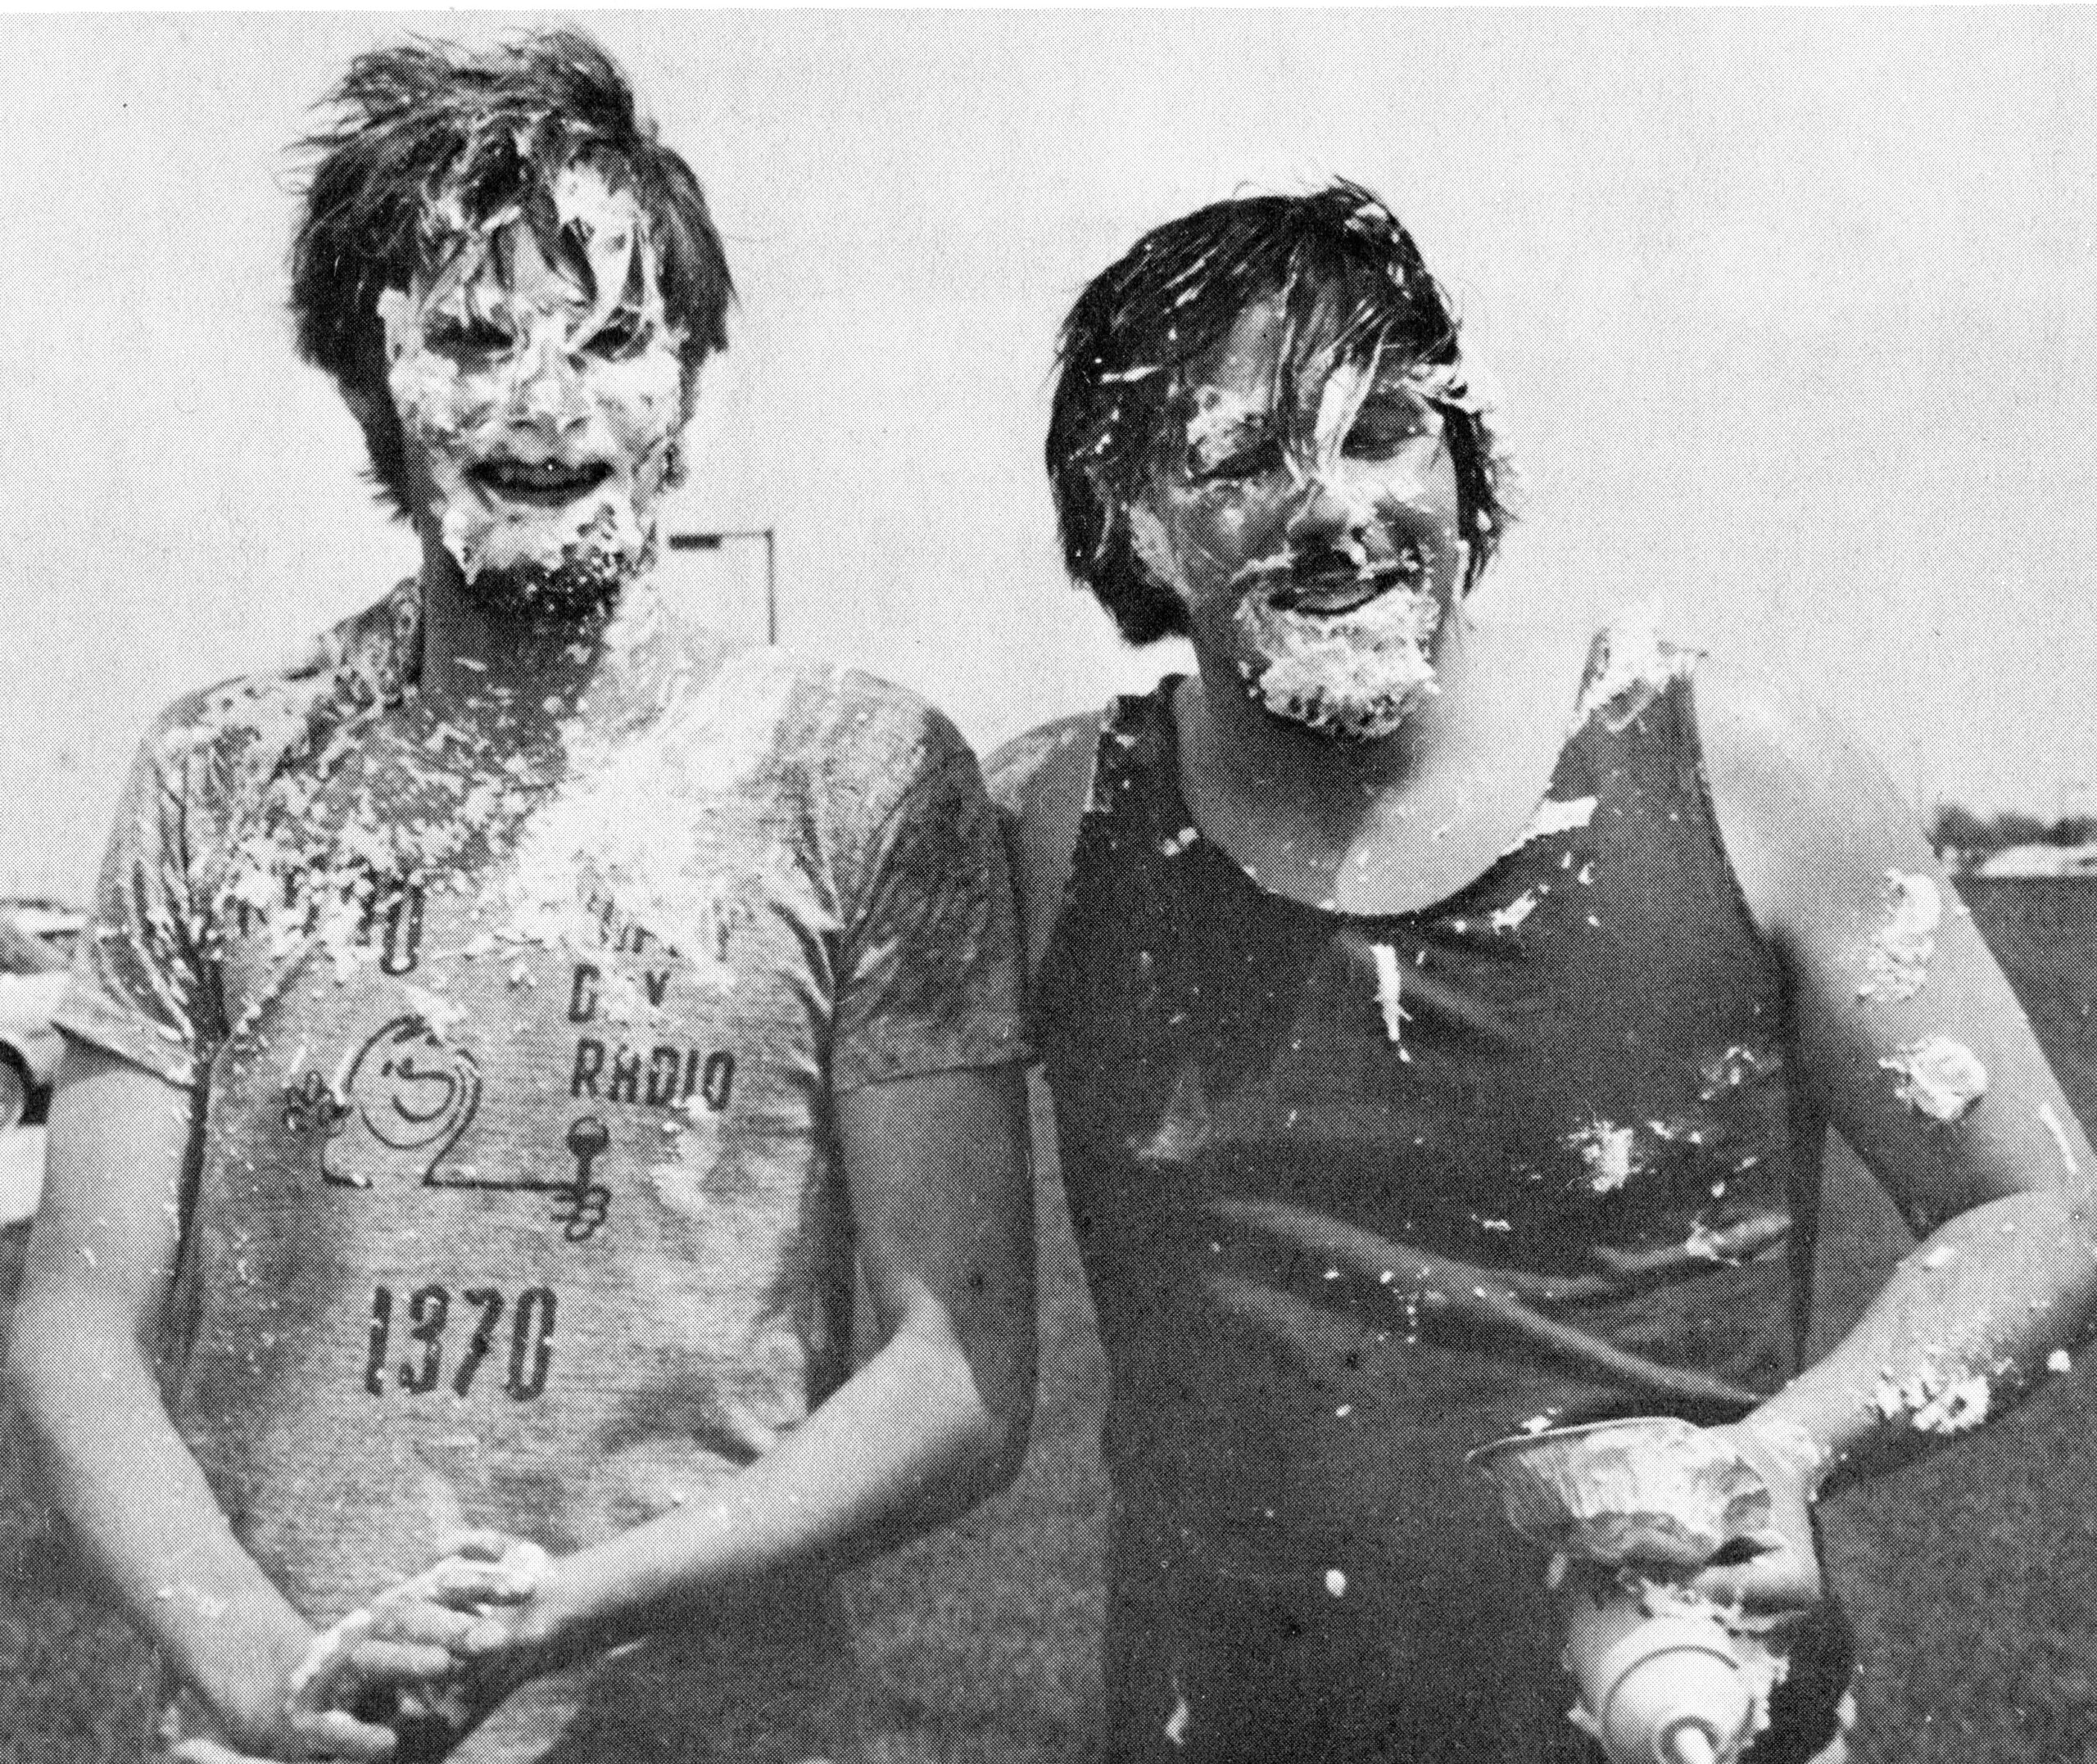 Bob ‘KGNO’ Kirby (left) and Eric ‘KEDD’ Warshaw (right) square off for the DJ duel of the century during the cream-pie fight at the 1972 Spring Fling. [College Archives]